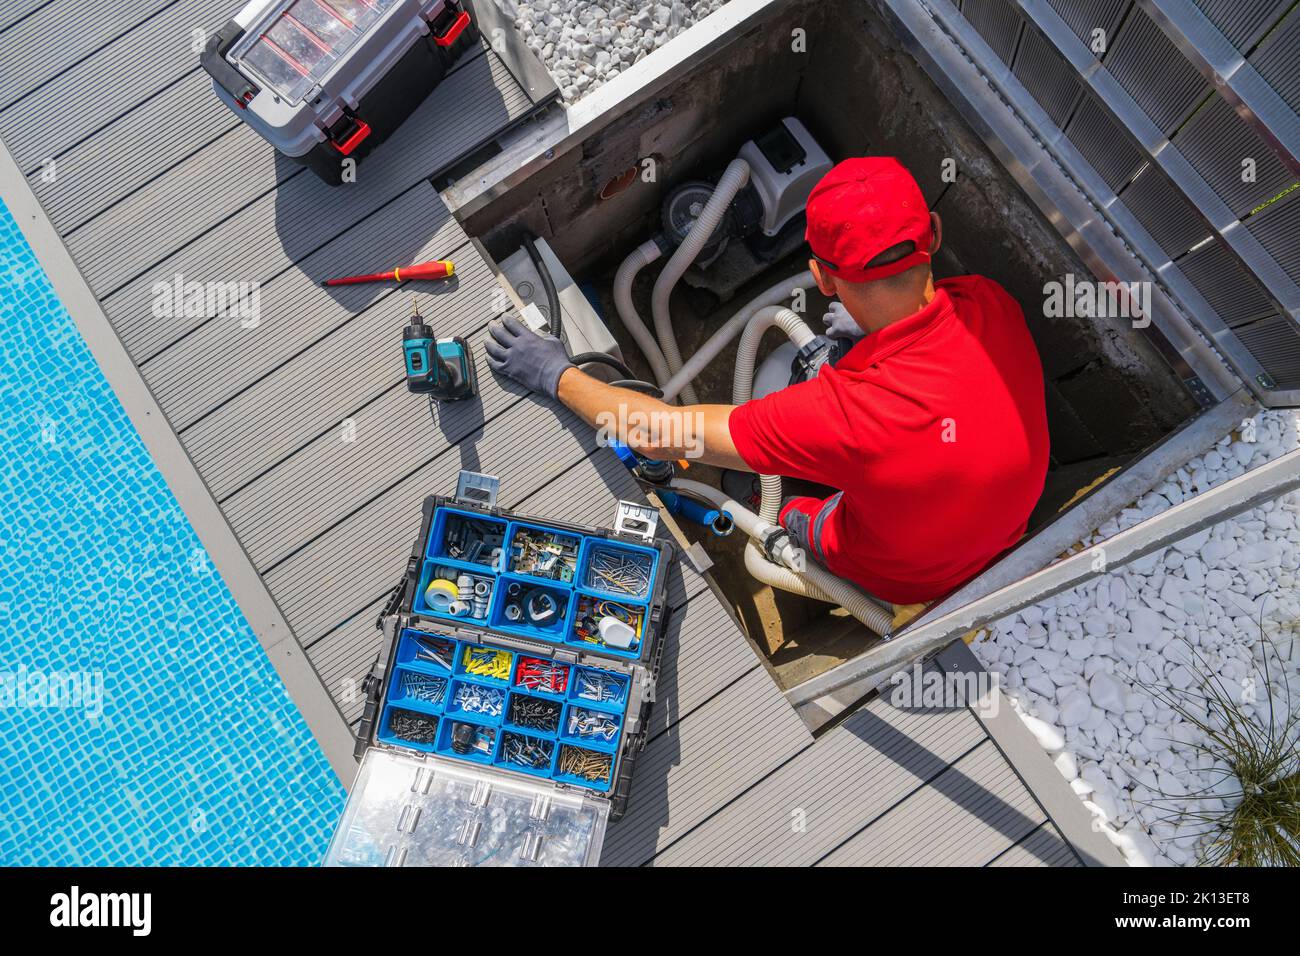 Outdoor Swimming Pool Cleaning and Heating Equipment Seasonal Maintenance Performed by SPA Professional Technician in His 40s. Stock Photo